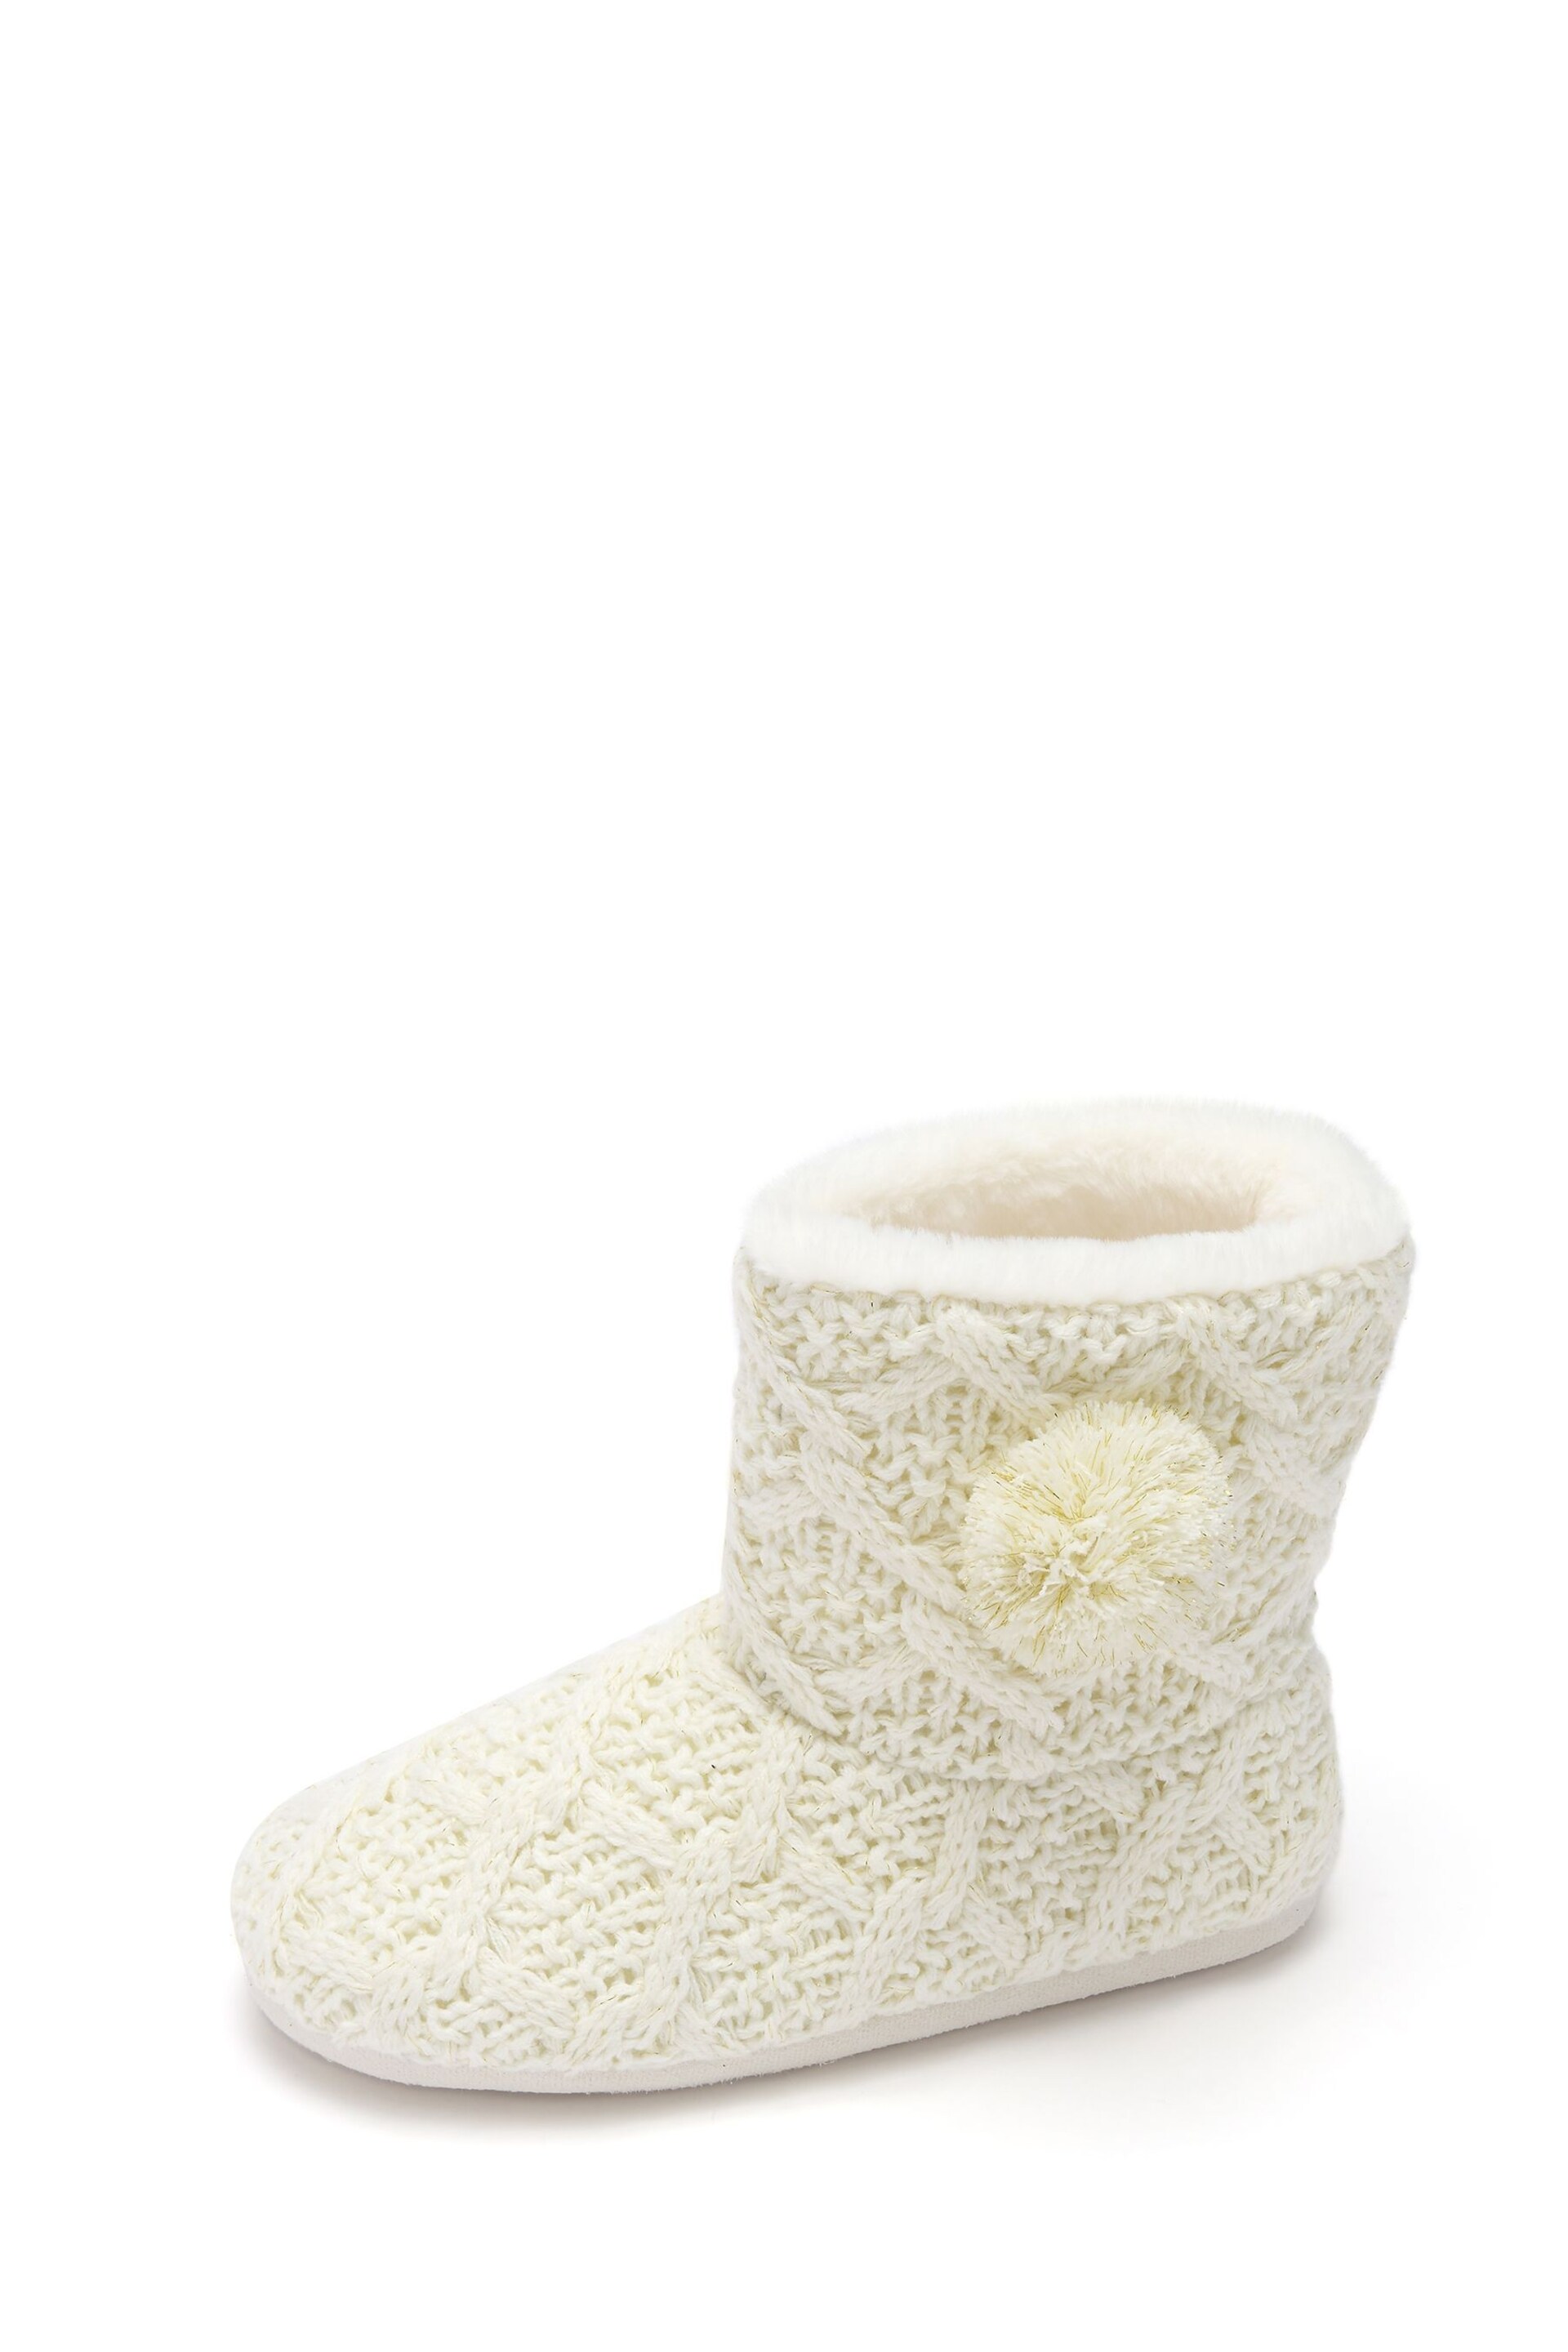 Pour Moi Cream Cable Knit Faux Fur Lined Bootie Slippers - Image 3 of 3